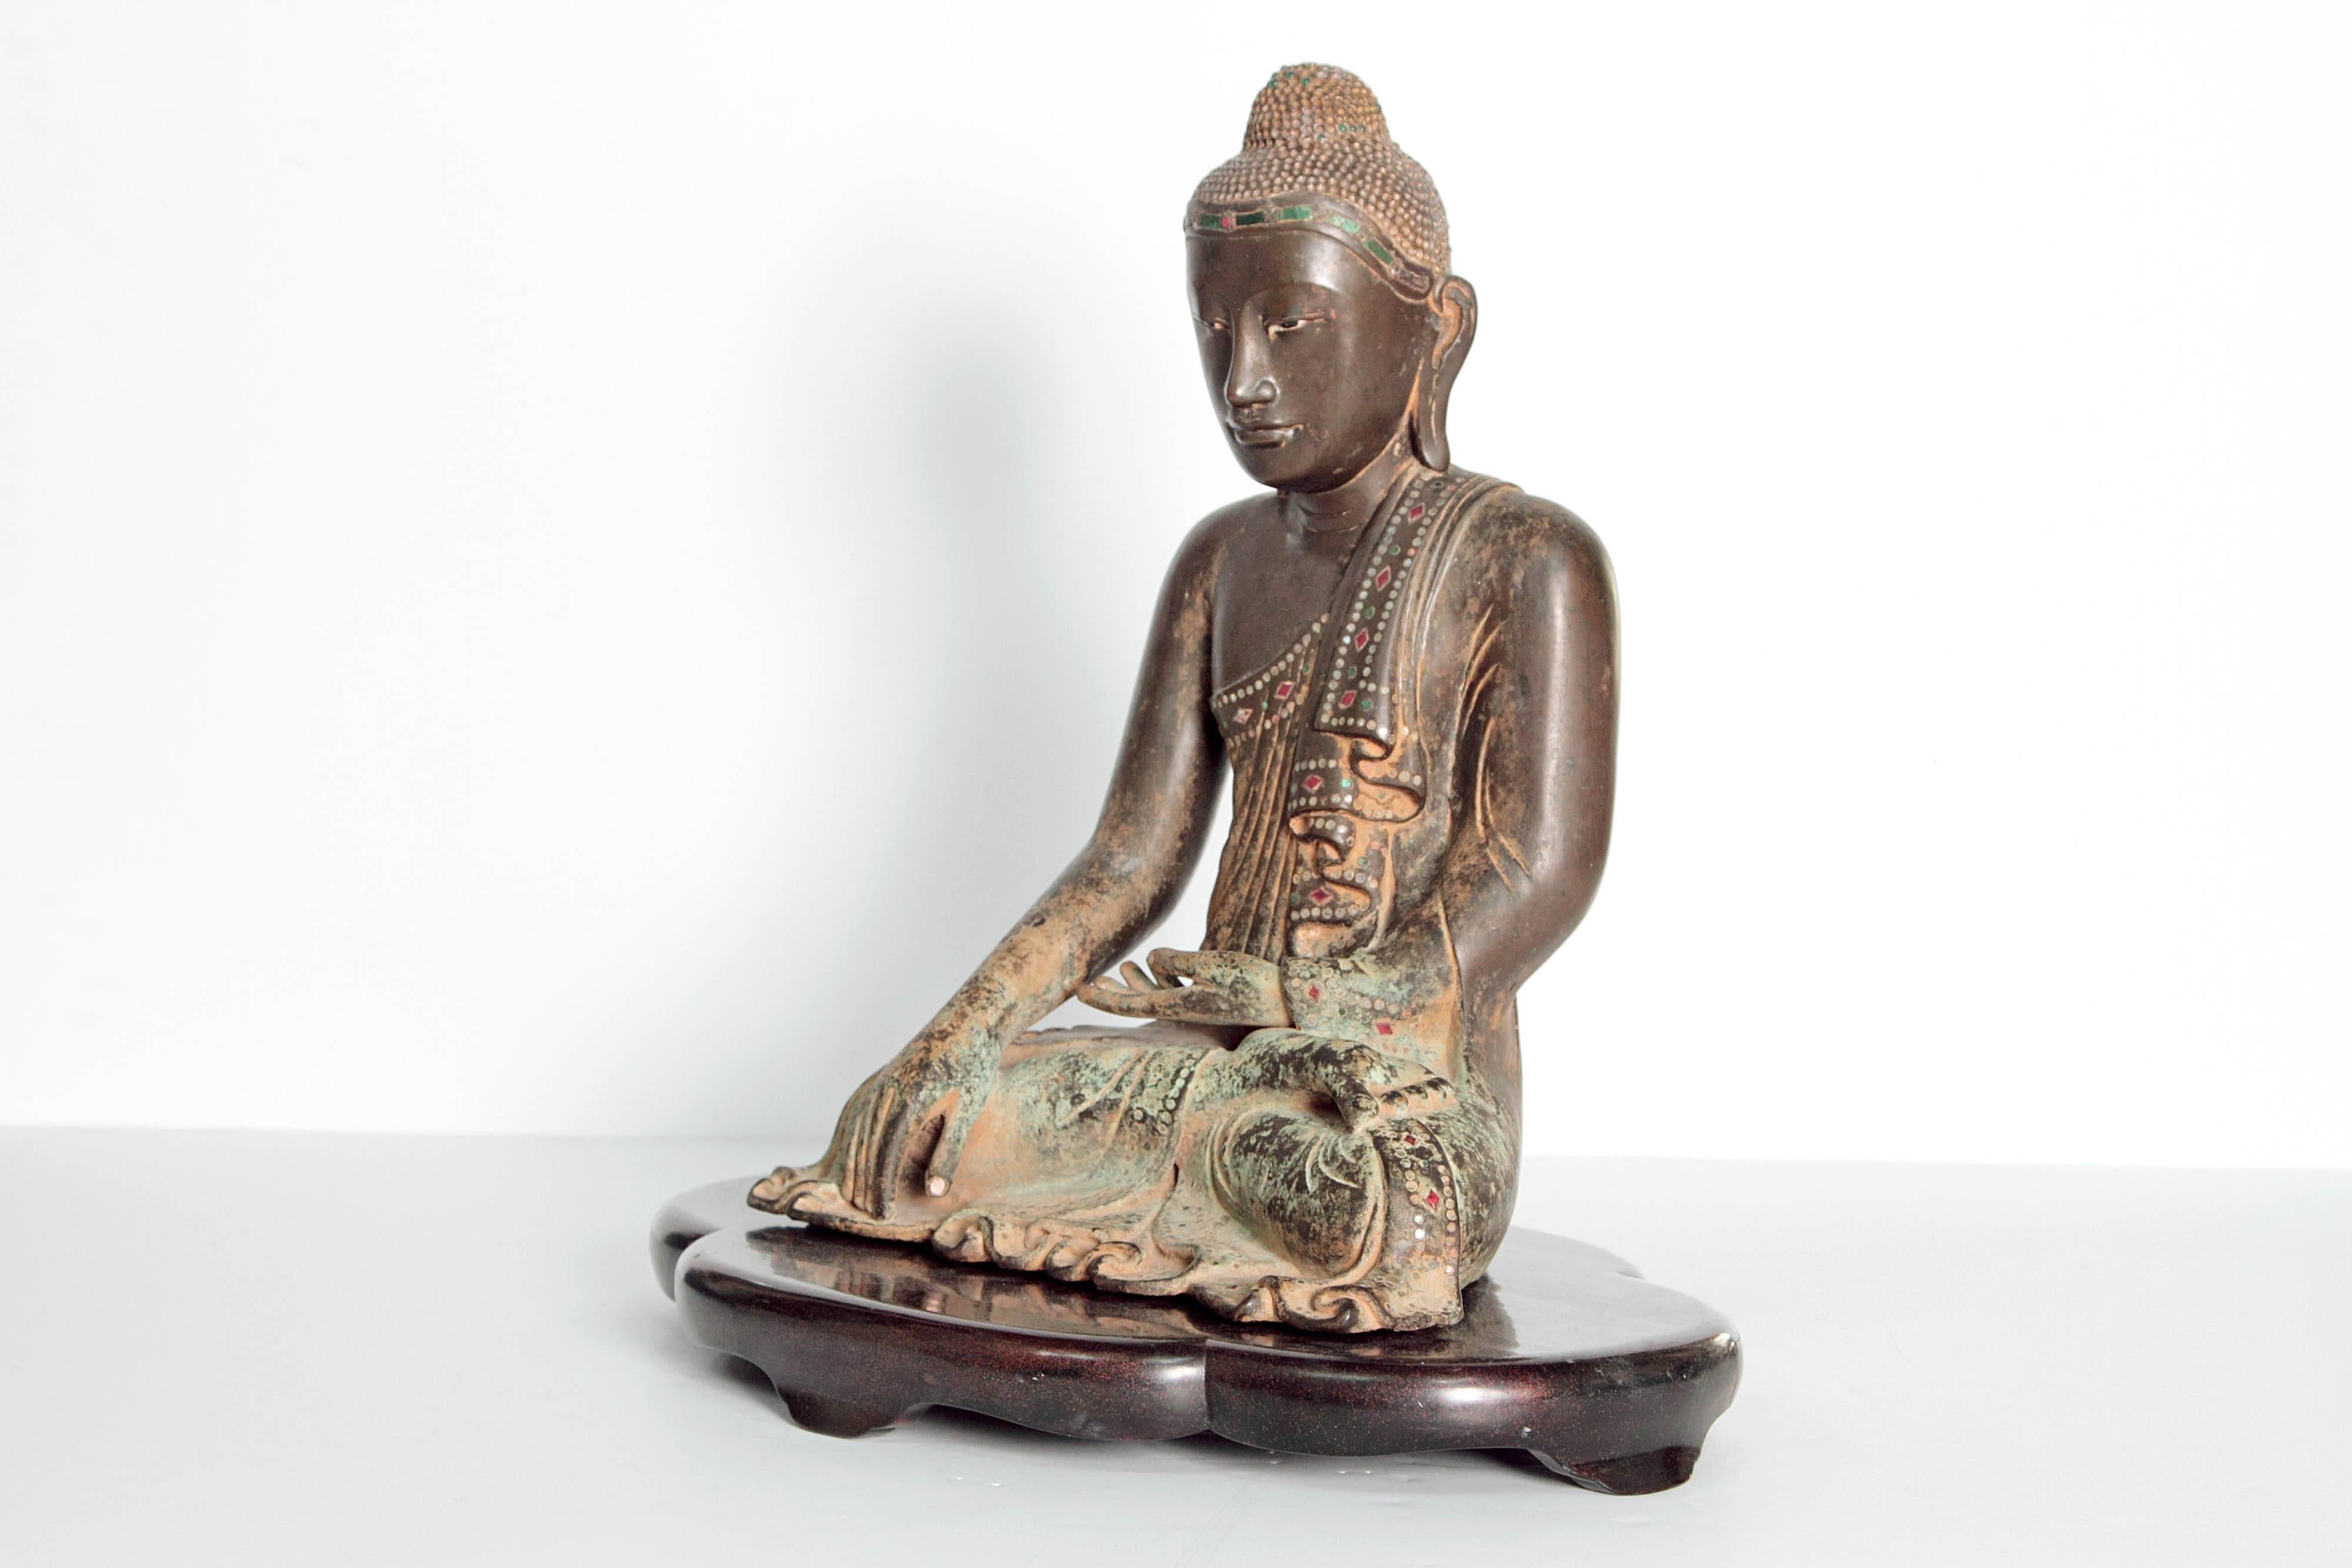 A figure of a 19th century seated Buddha in a meditative pose. Patinated bronze (with Verdigris) accented with colored glass as jewels.